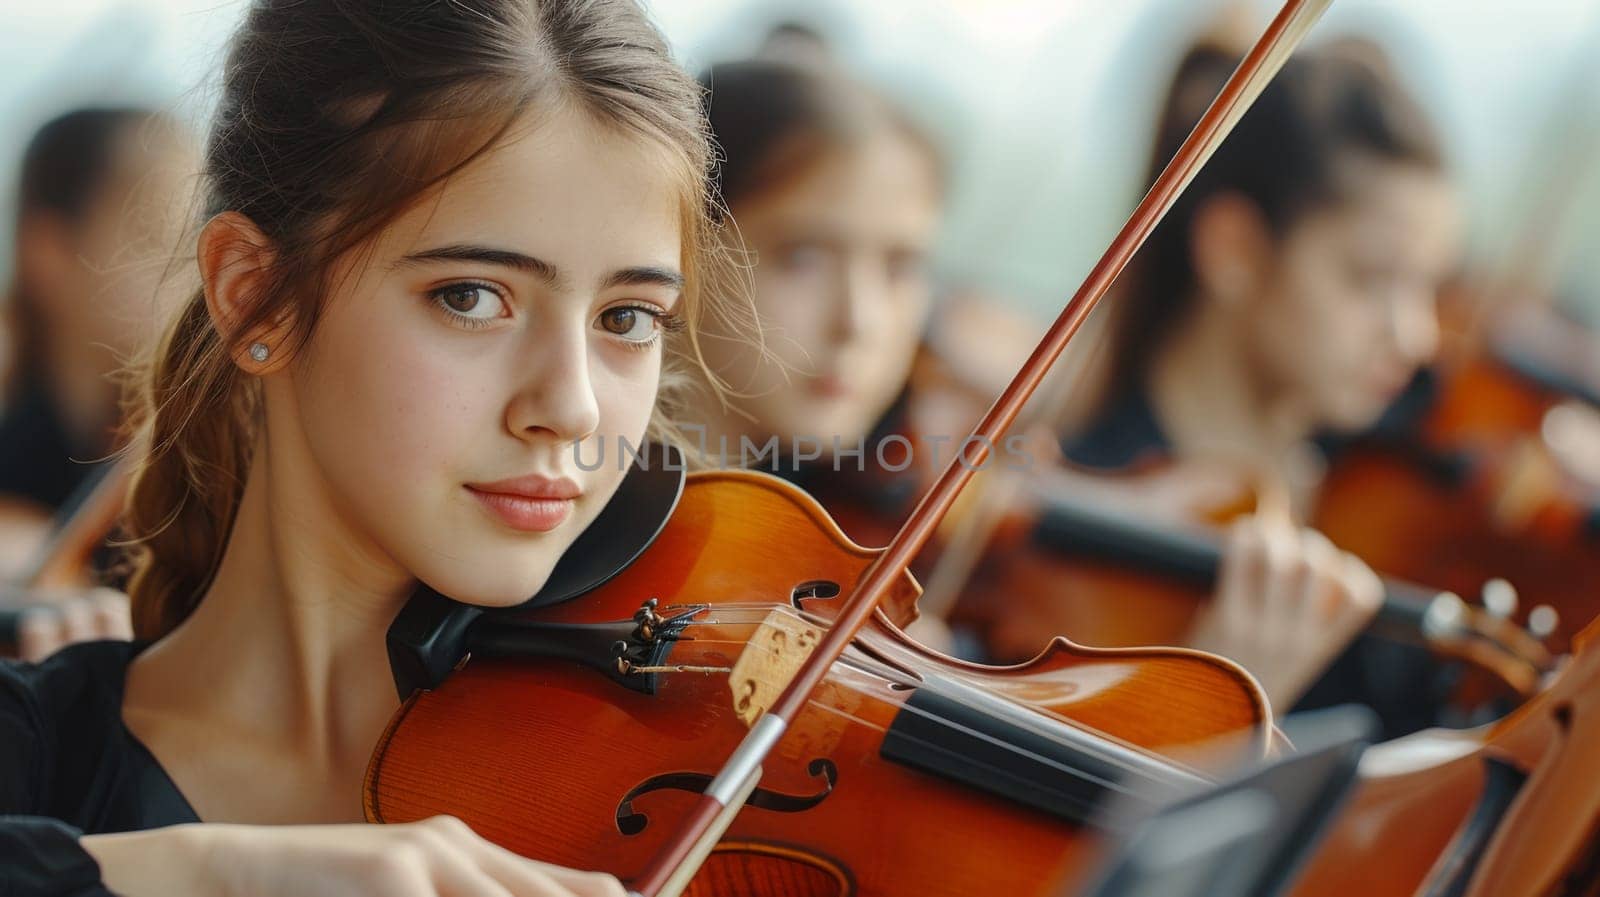 A young girl playing violin in a group of other girls